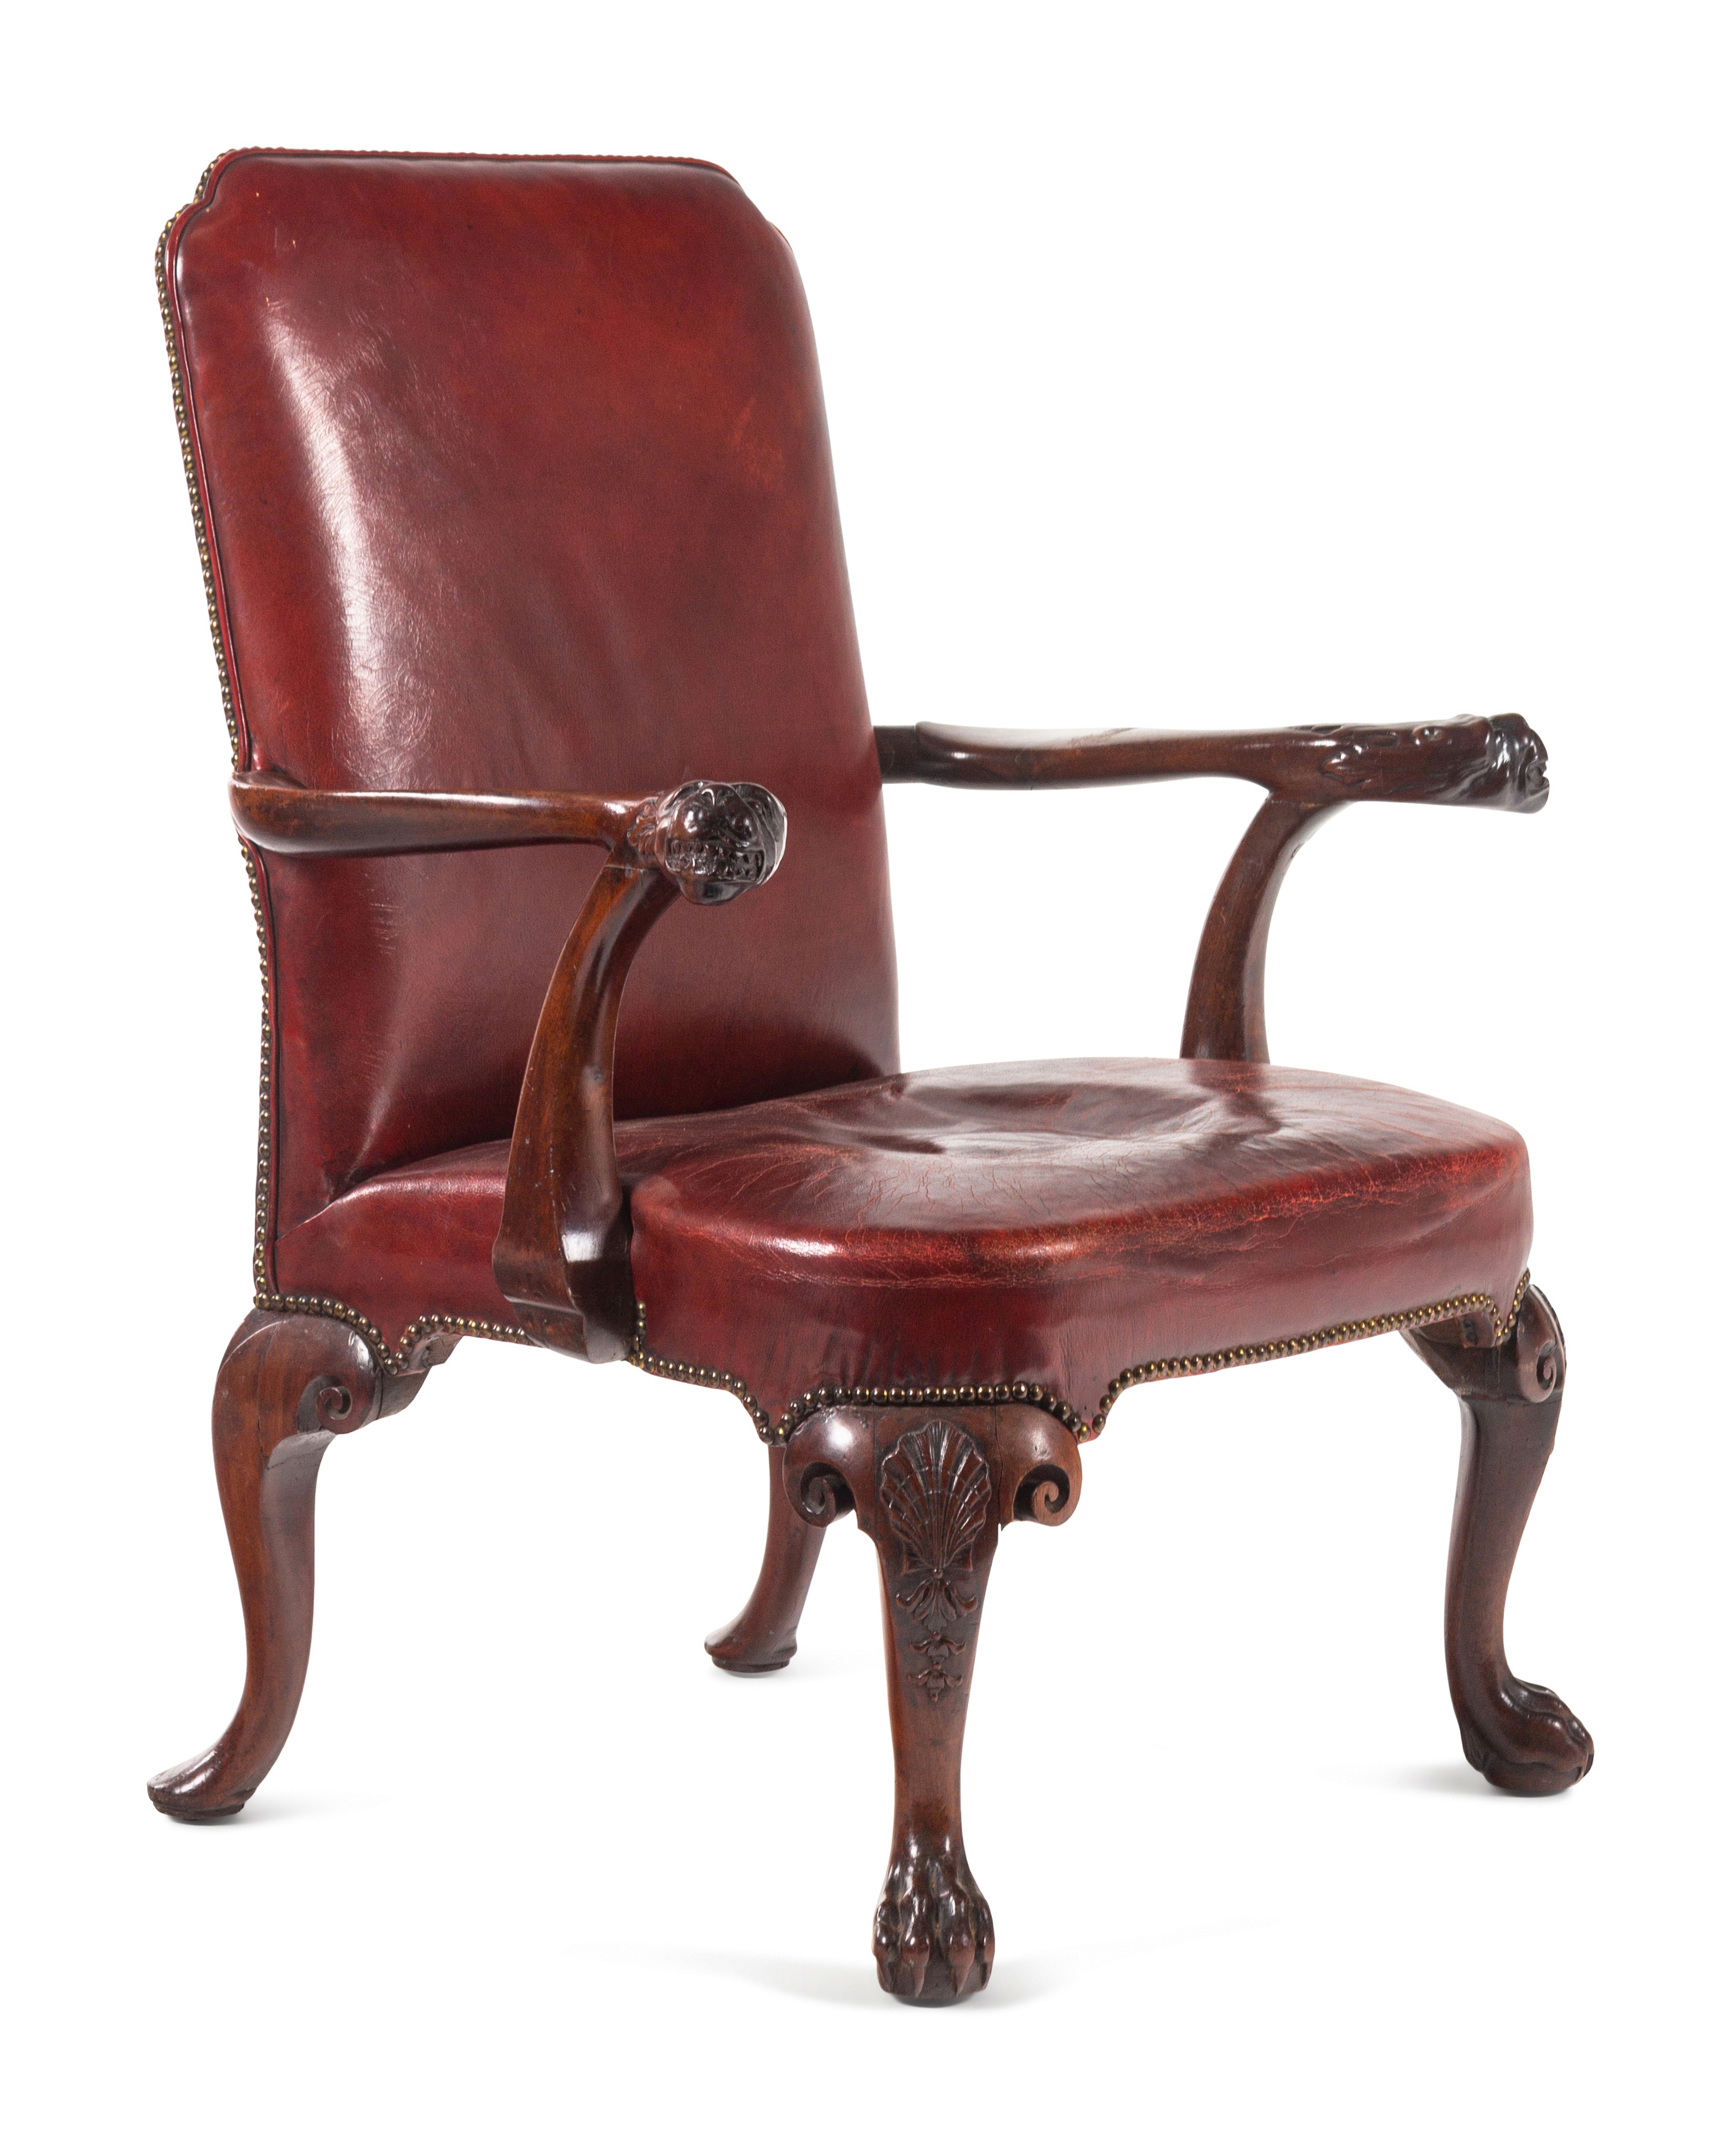 A George II Leather-Upholstered Carved Mahogany Library Chair - Image 3 of 8